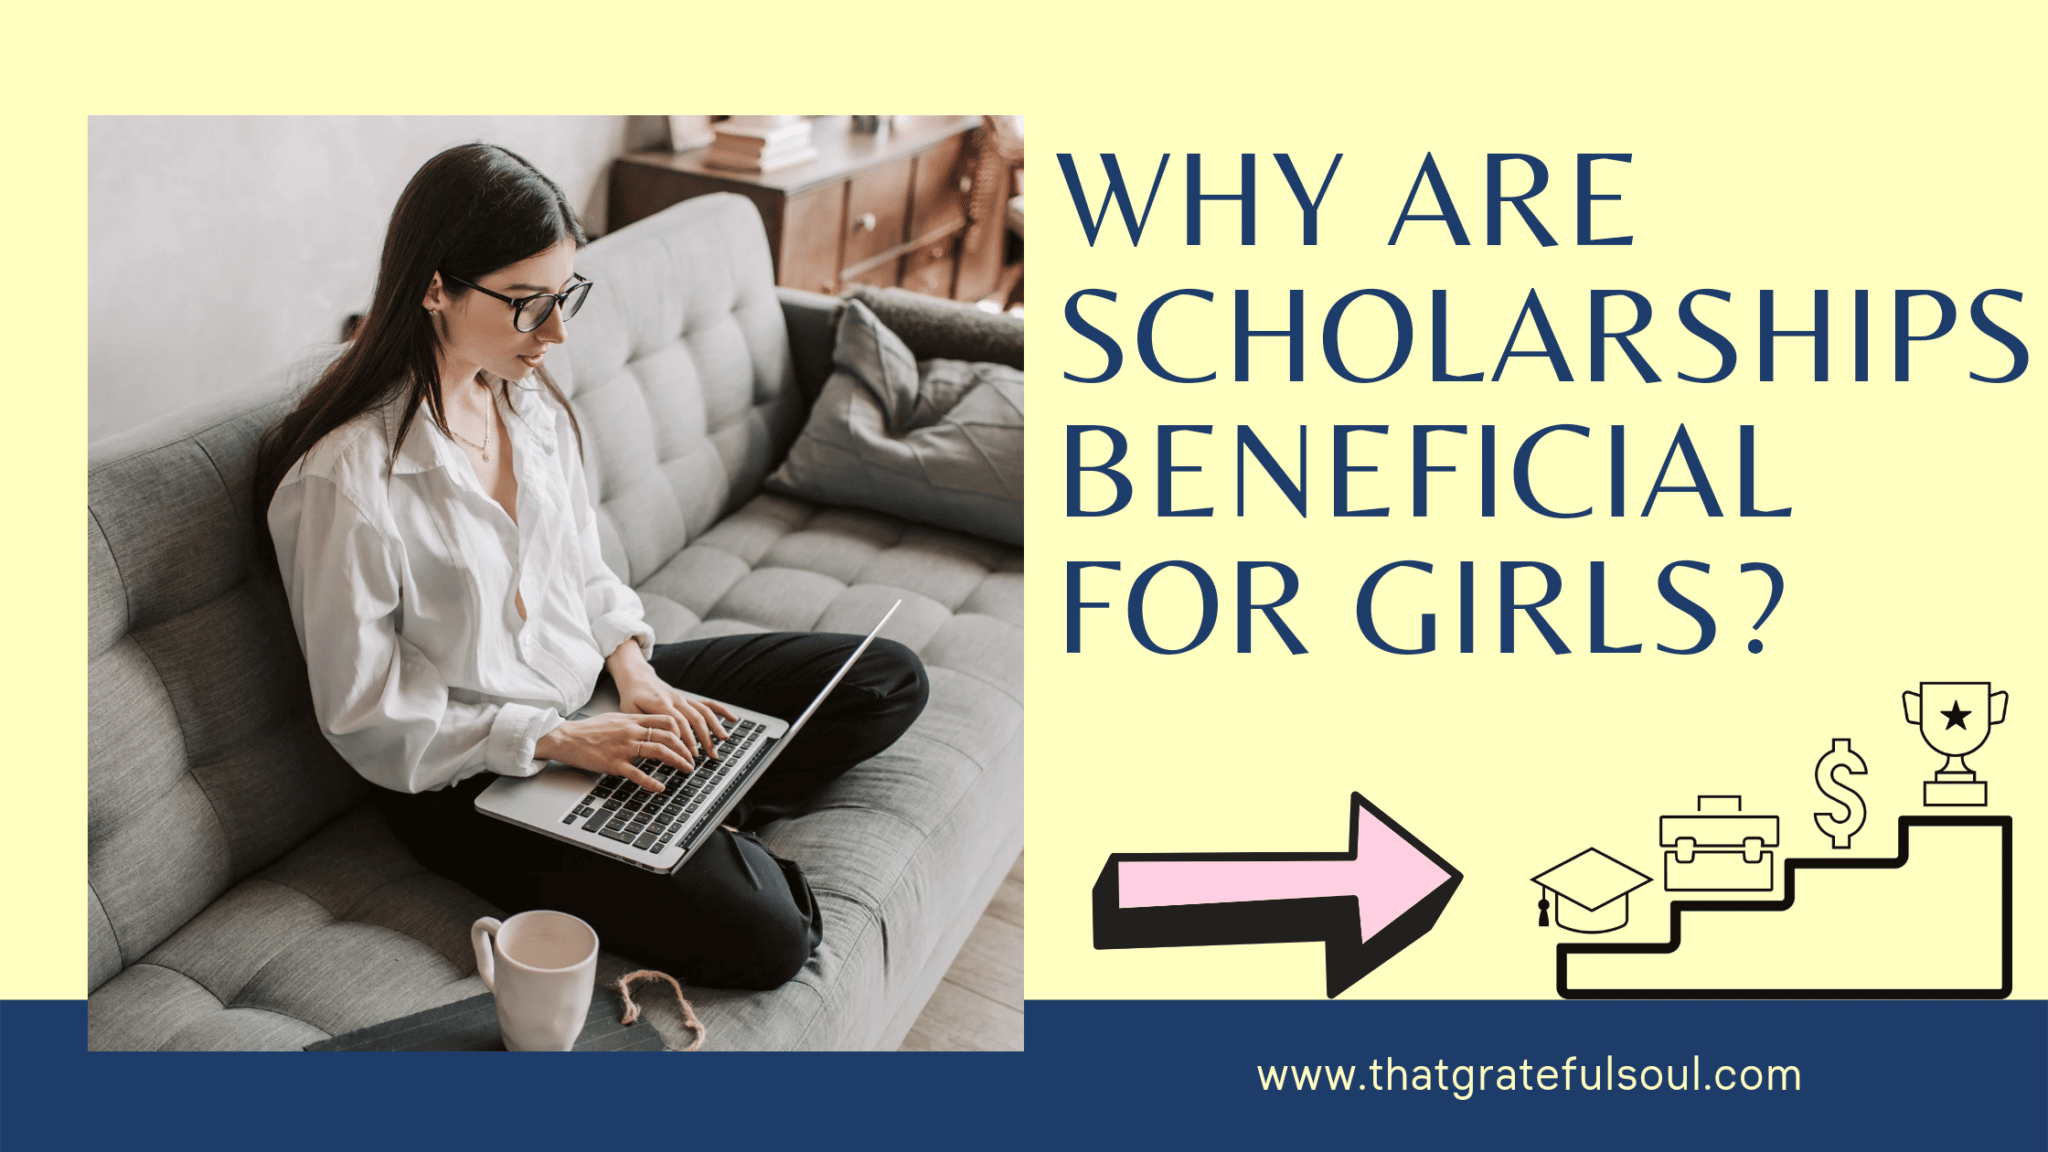 why are scholarship are beneficial for girls?